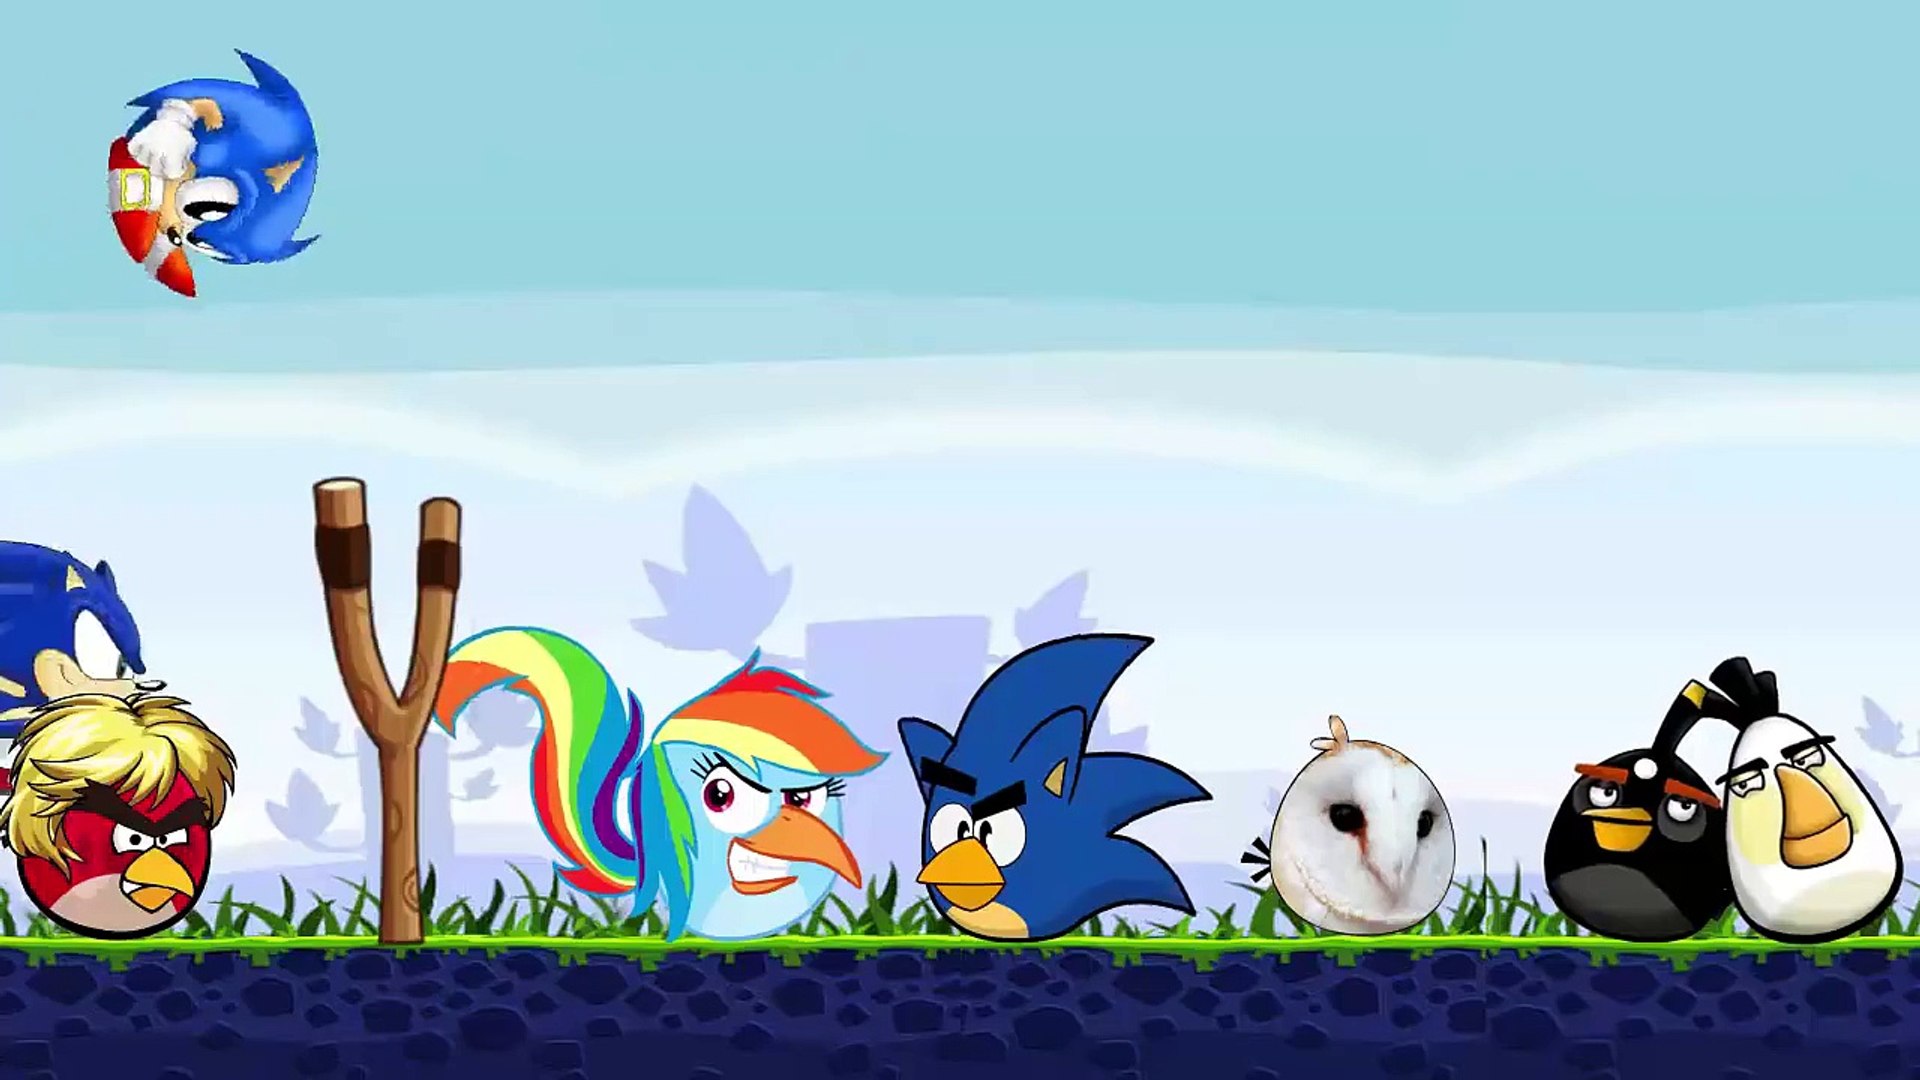 in angry birds Epic, there's a hat referencing Sonic : r/SonicTheHedgehog